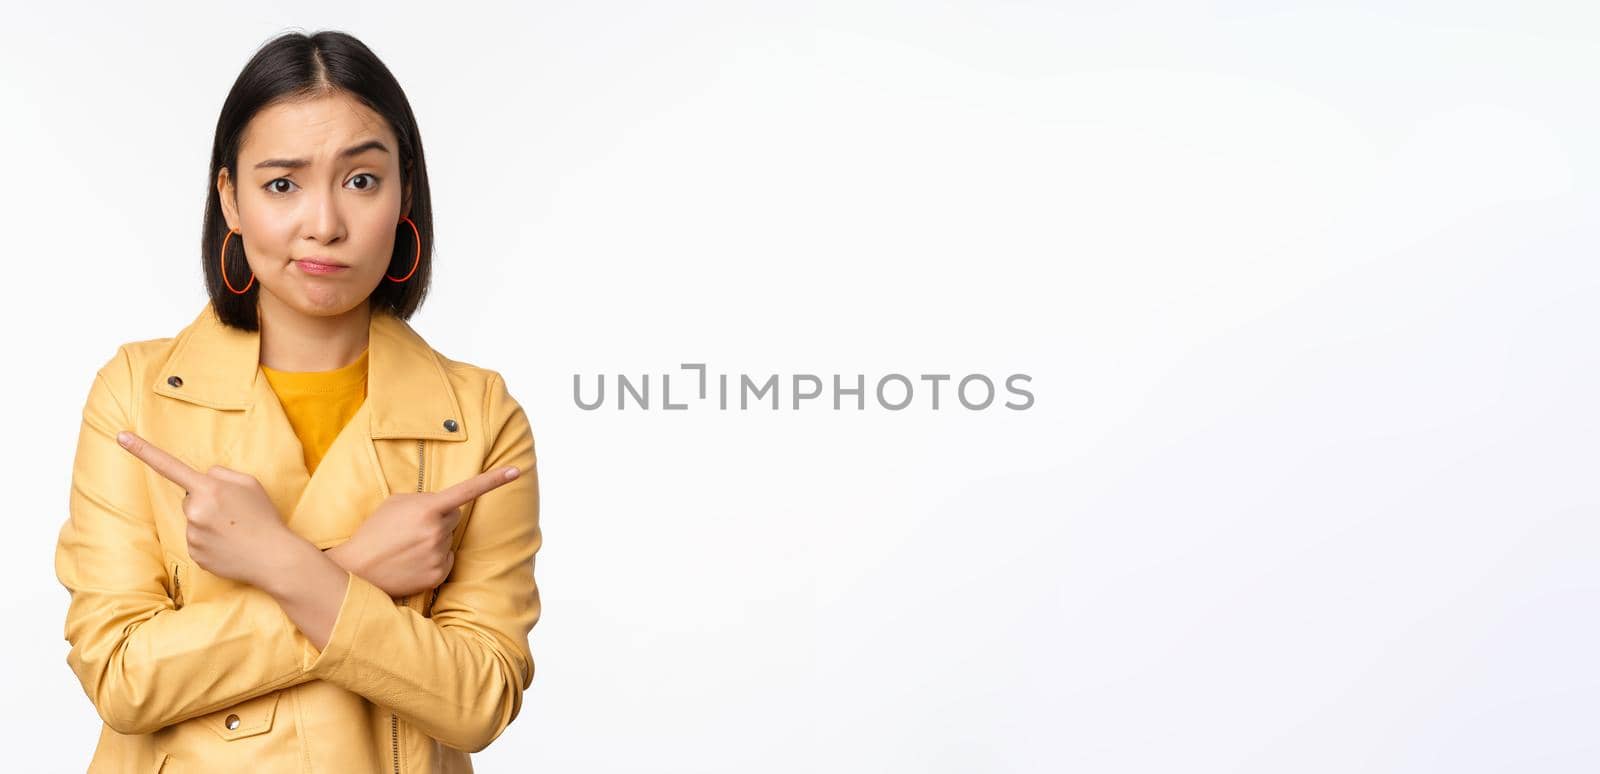 Image of indecisive asian girl, pointing fingers sideways, pointing left and right, choosing variant, deciding, standing over white background. Copy space